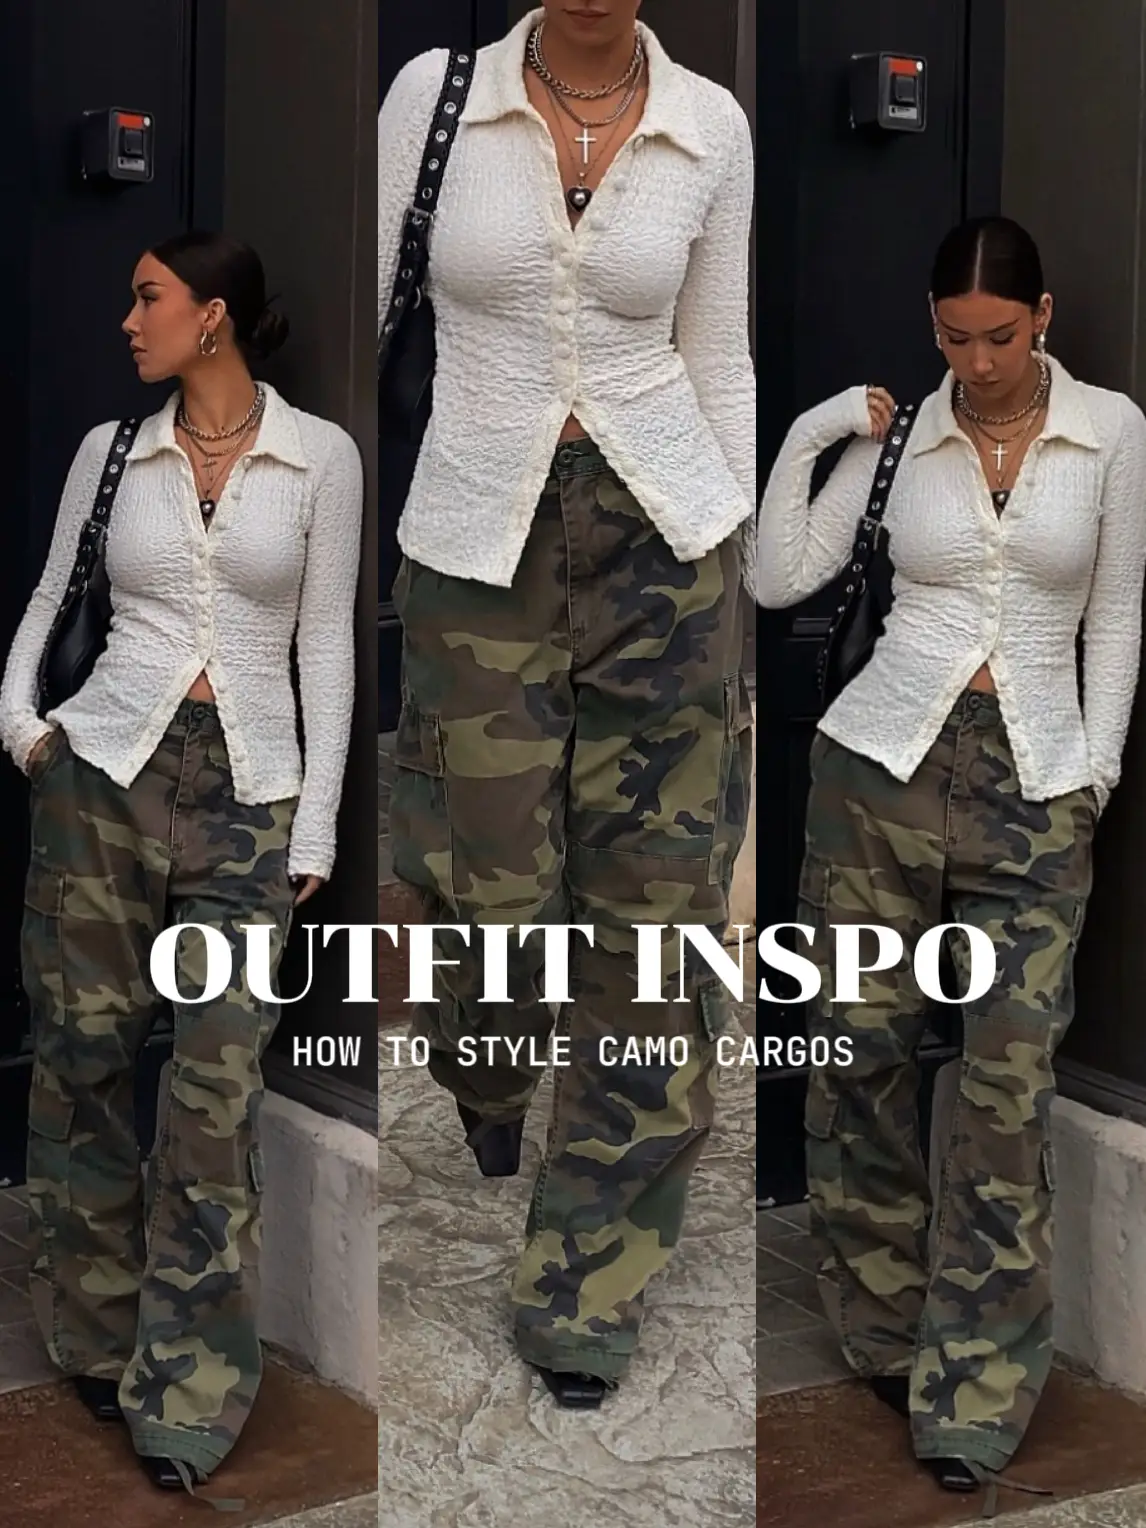 Outfit inspo: How to style camp cargos 🖤, Gallery posted by Lindley  Edwards